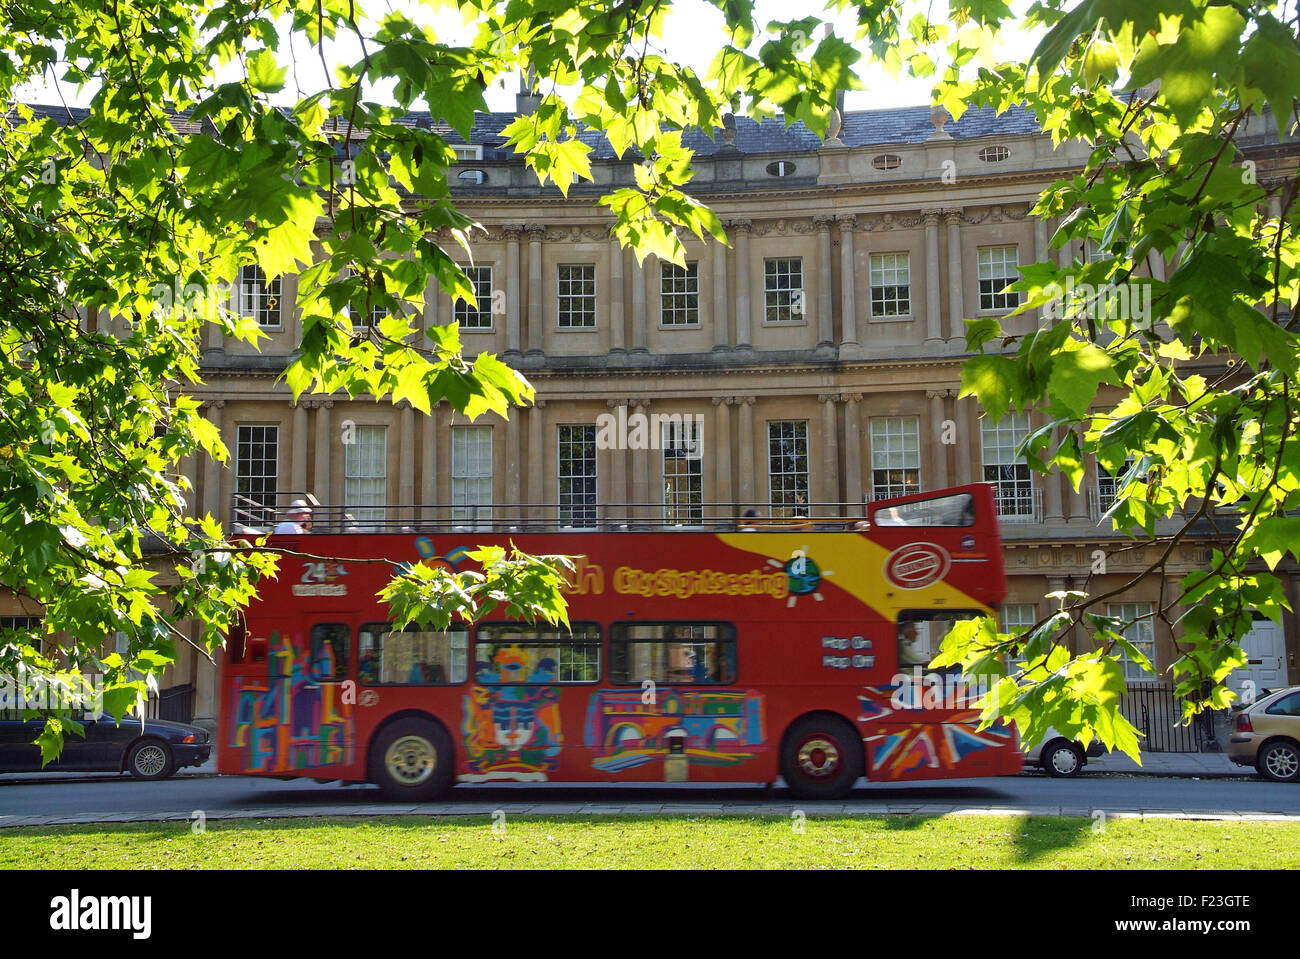 The city of Bath views, including abbey churchyard and the circus with tourist bus. a UK visit visitors cities 'Bath Abbey' Stock Photo